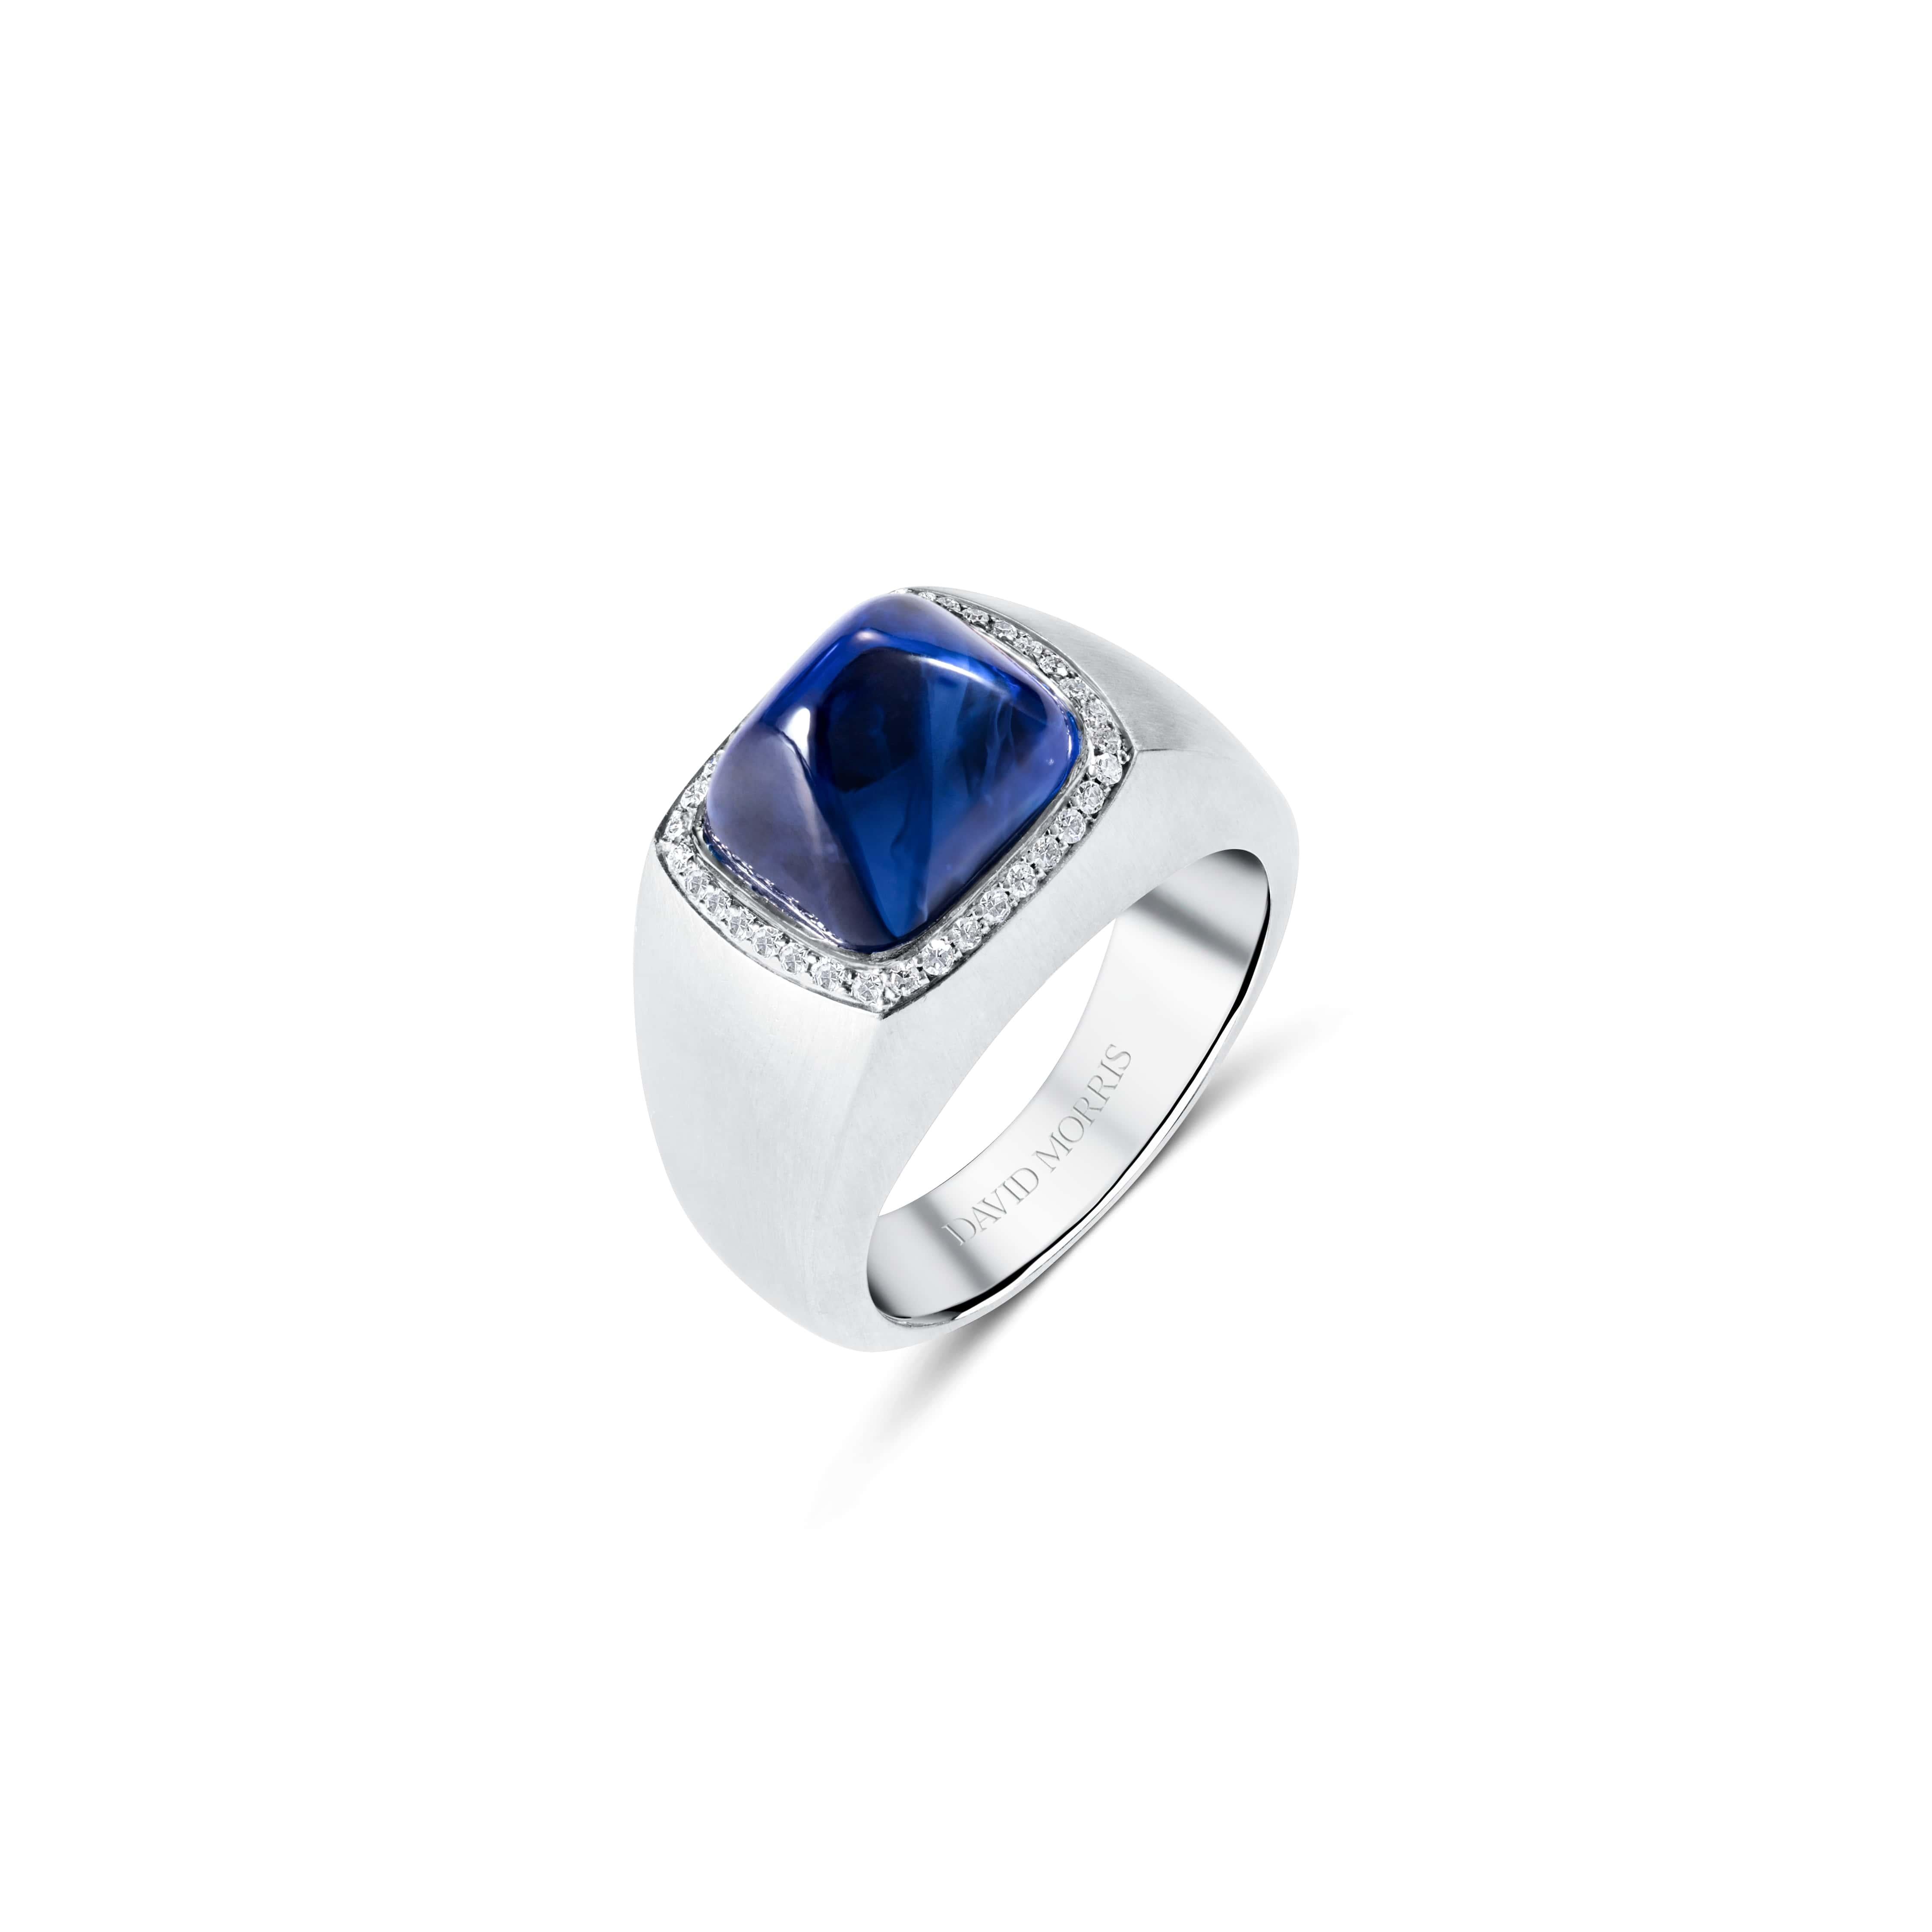 A sapphire ring is a timeless choice for any occasion, and this blue sapphire signet ring from David Morris is made with an exceptional sugar loaf sapphire in a velvety, deep blue tone. 


London jeweller David Morris selects only sapphires with